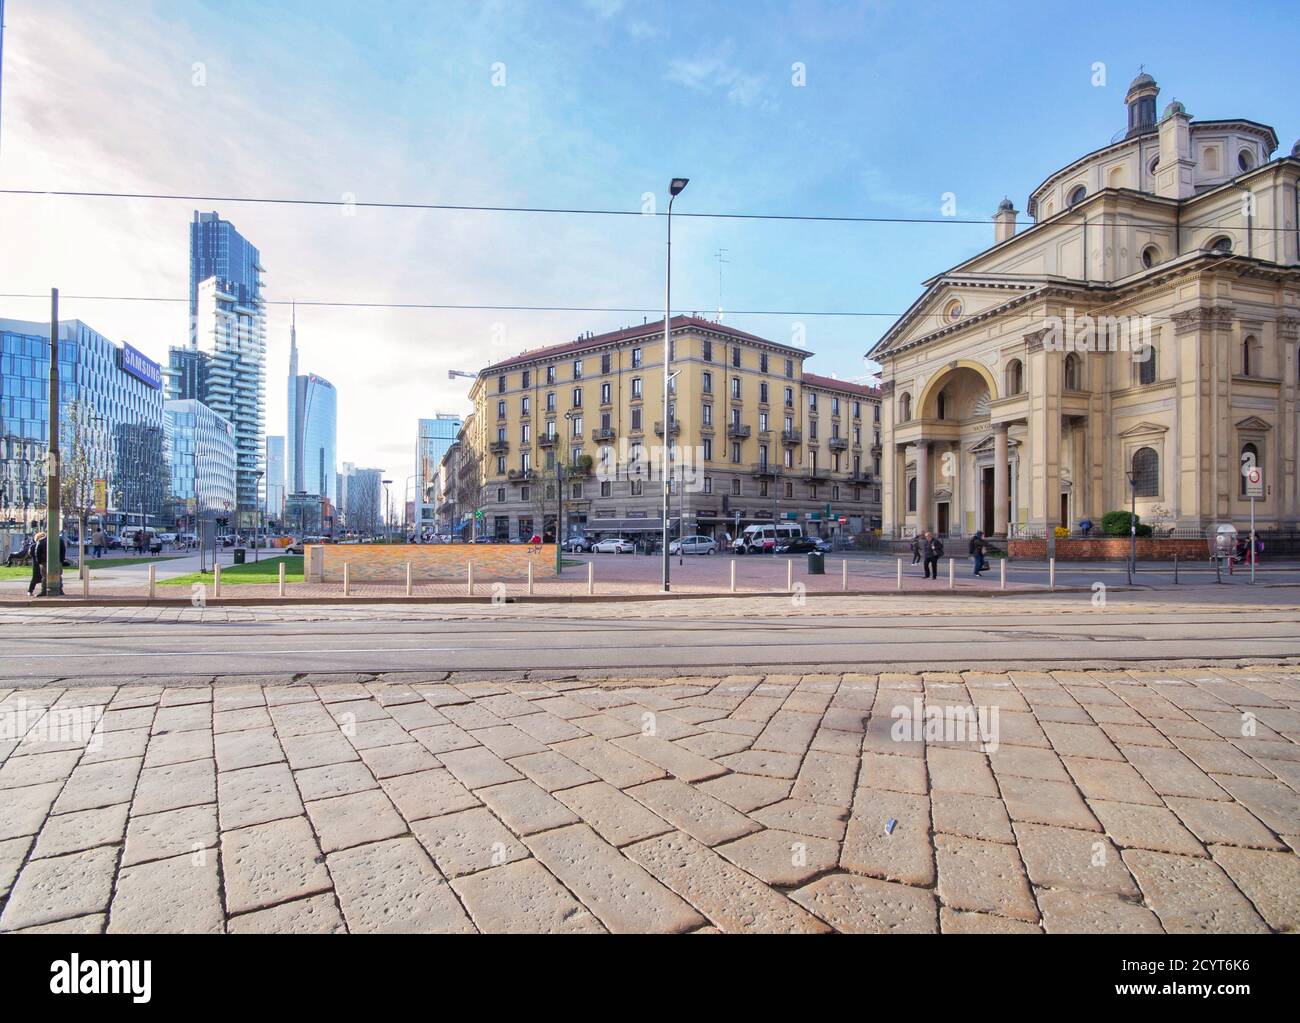 typical glimpse of the modern city center with the typical mix of ancient and modern buildings Stock Photo